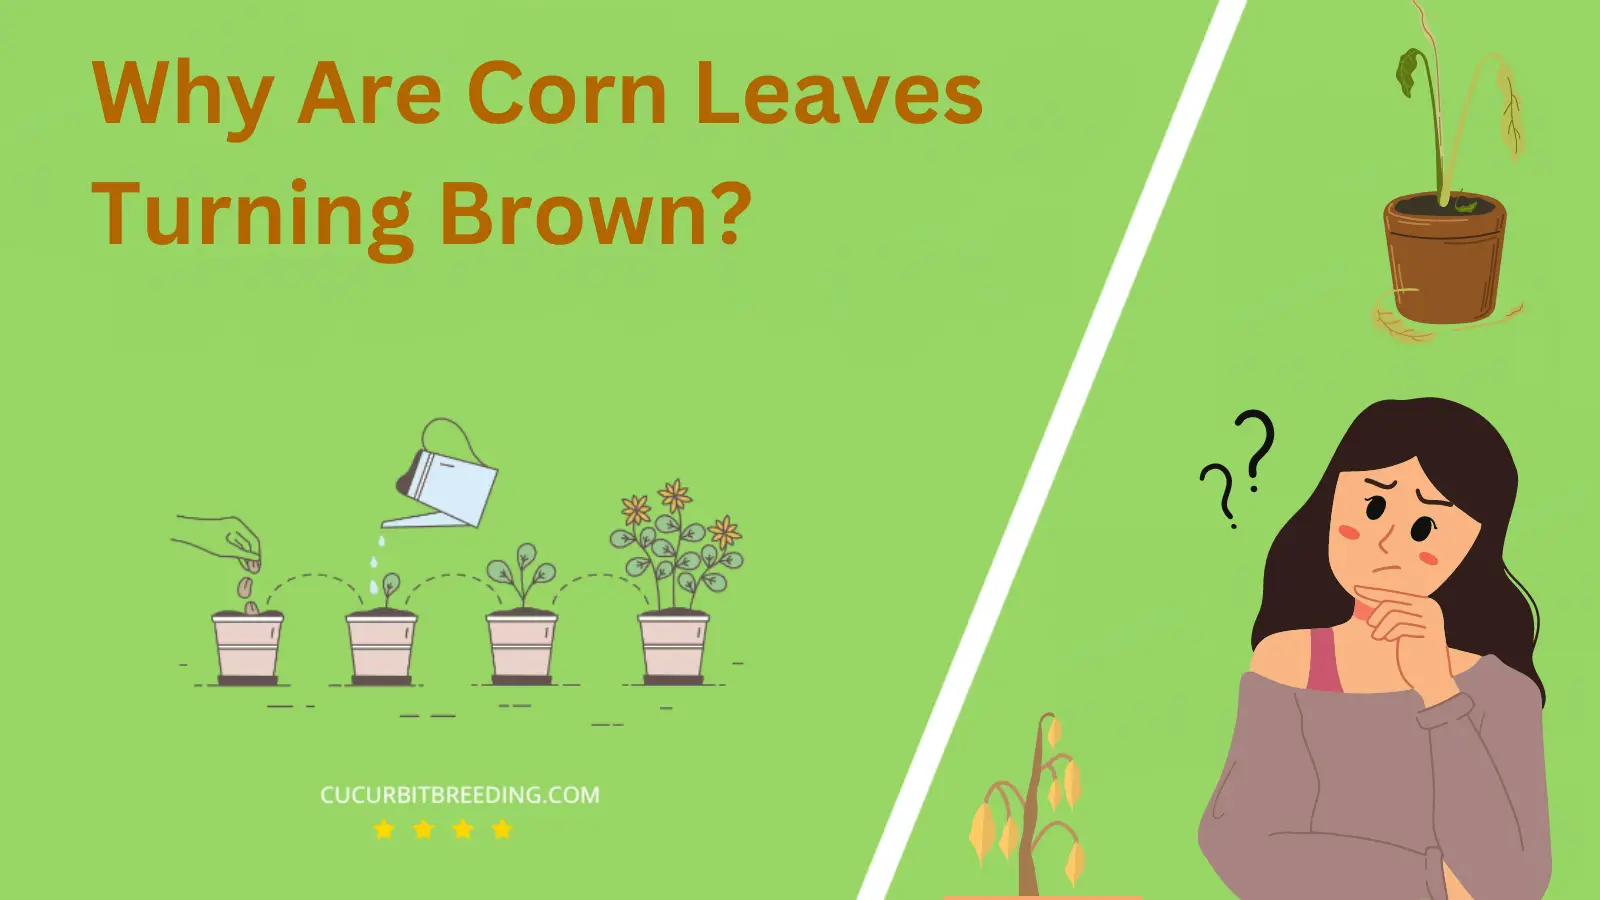 Why Are Corn Leaves Turning Brown